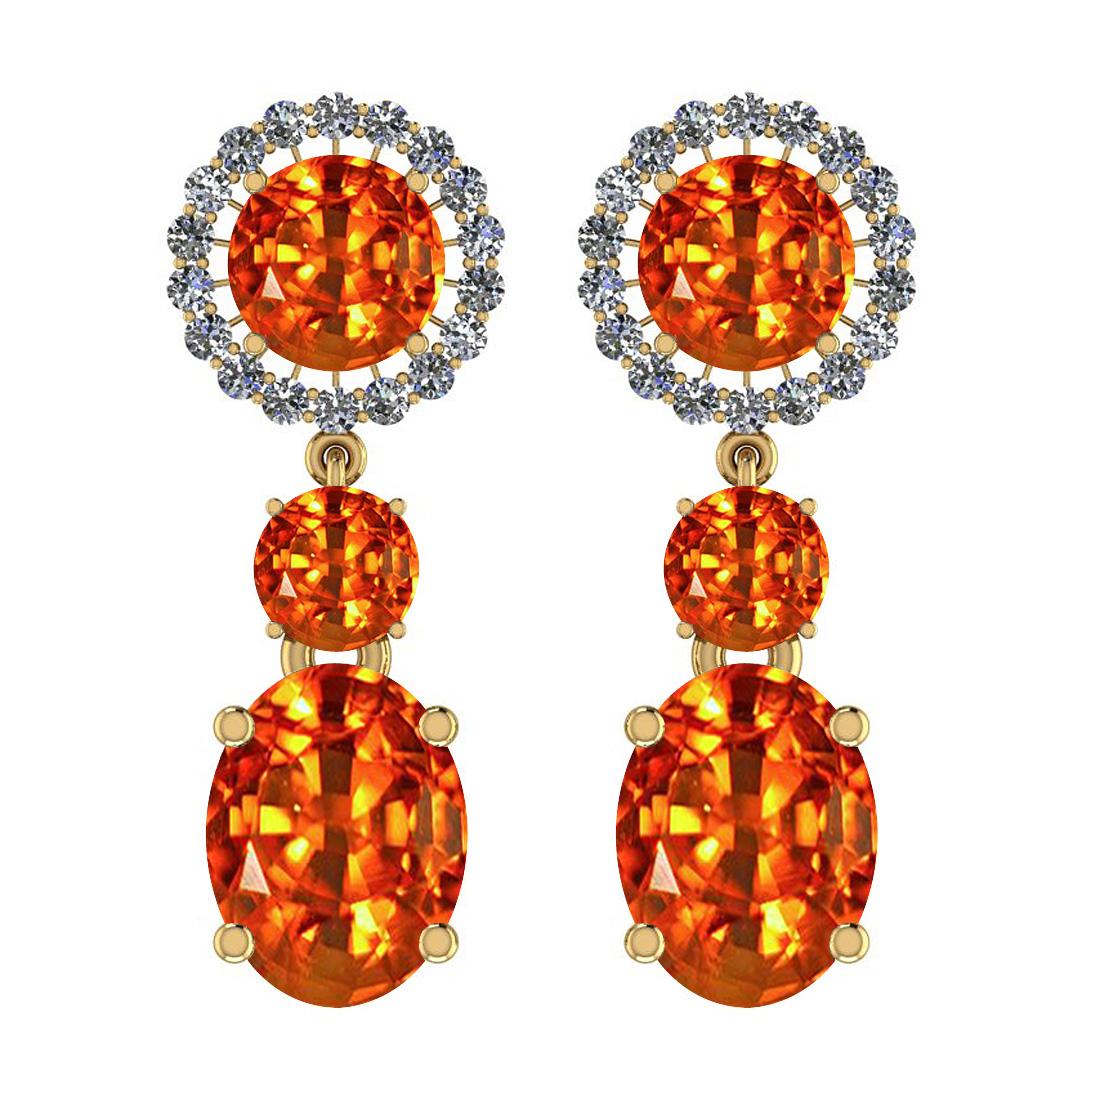 Certified 5.38 Ctw SI2/I1 Orange Sapphire And Diamond 14K Yellow Gold Vintage Style Earrings